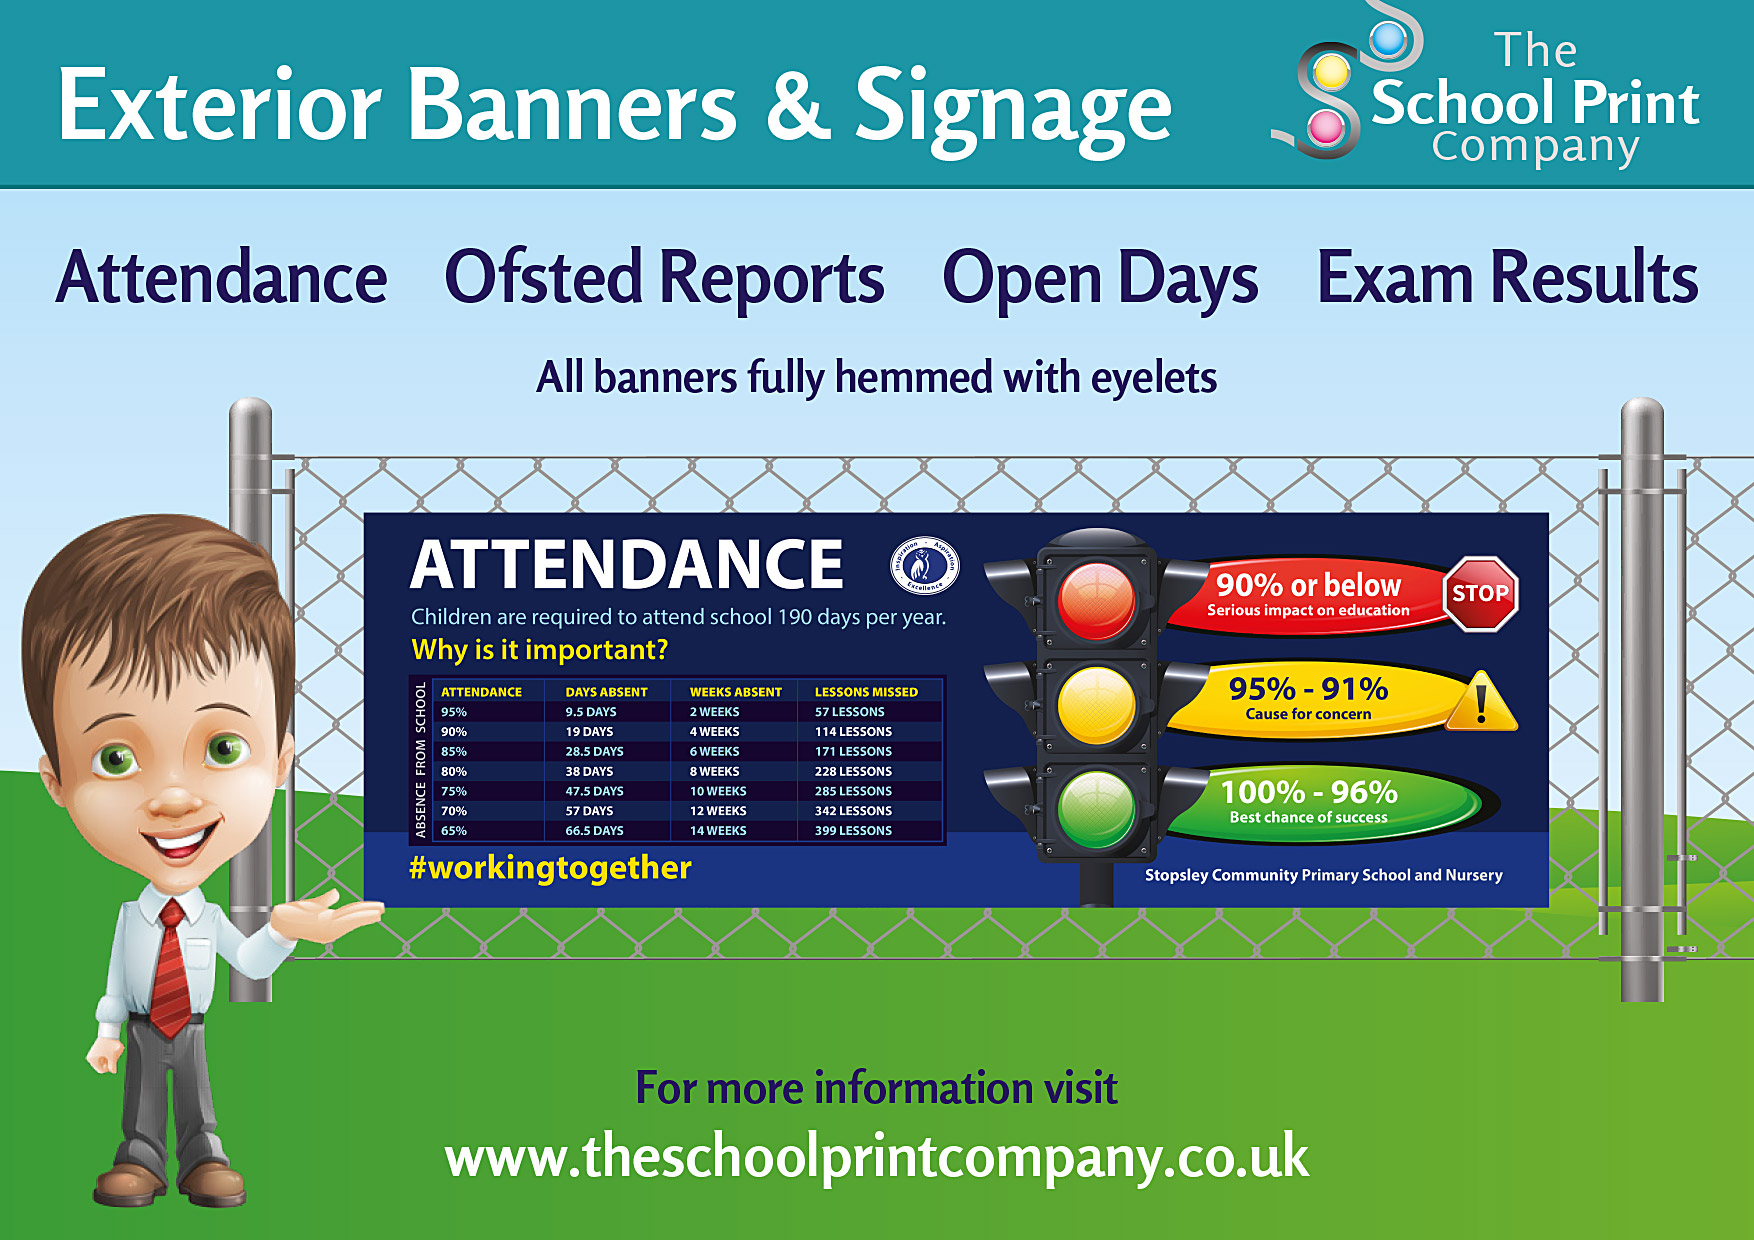 school exterior signage pvc banners attendance sign